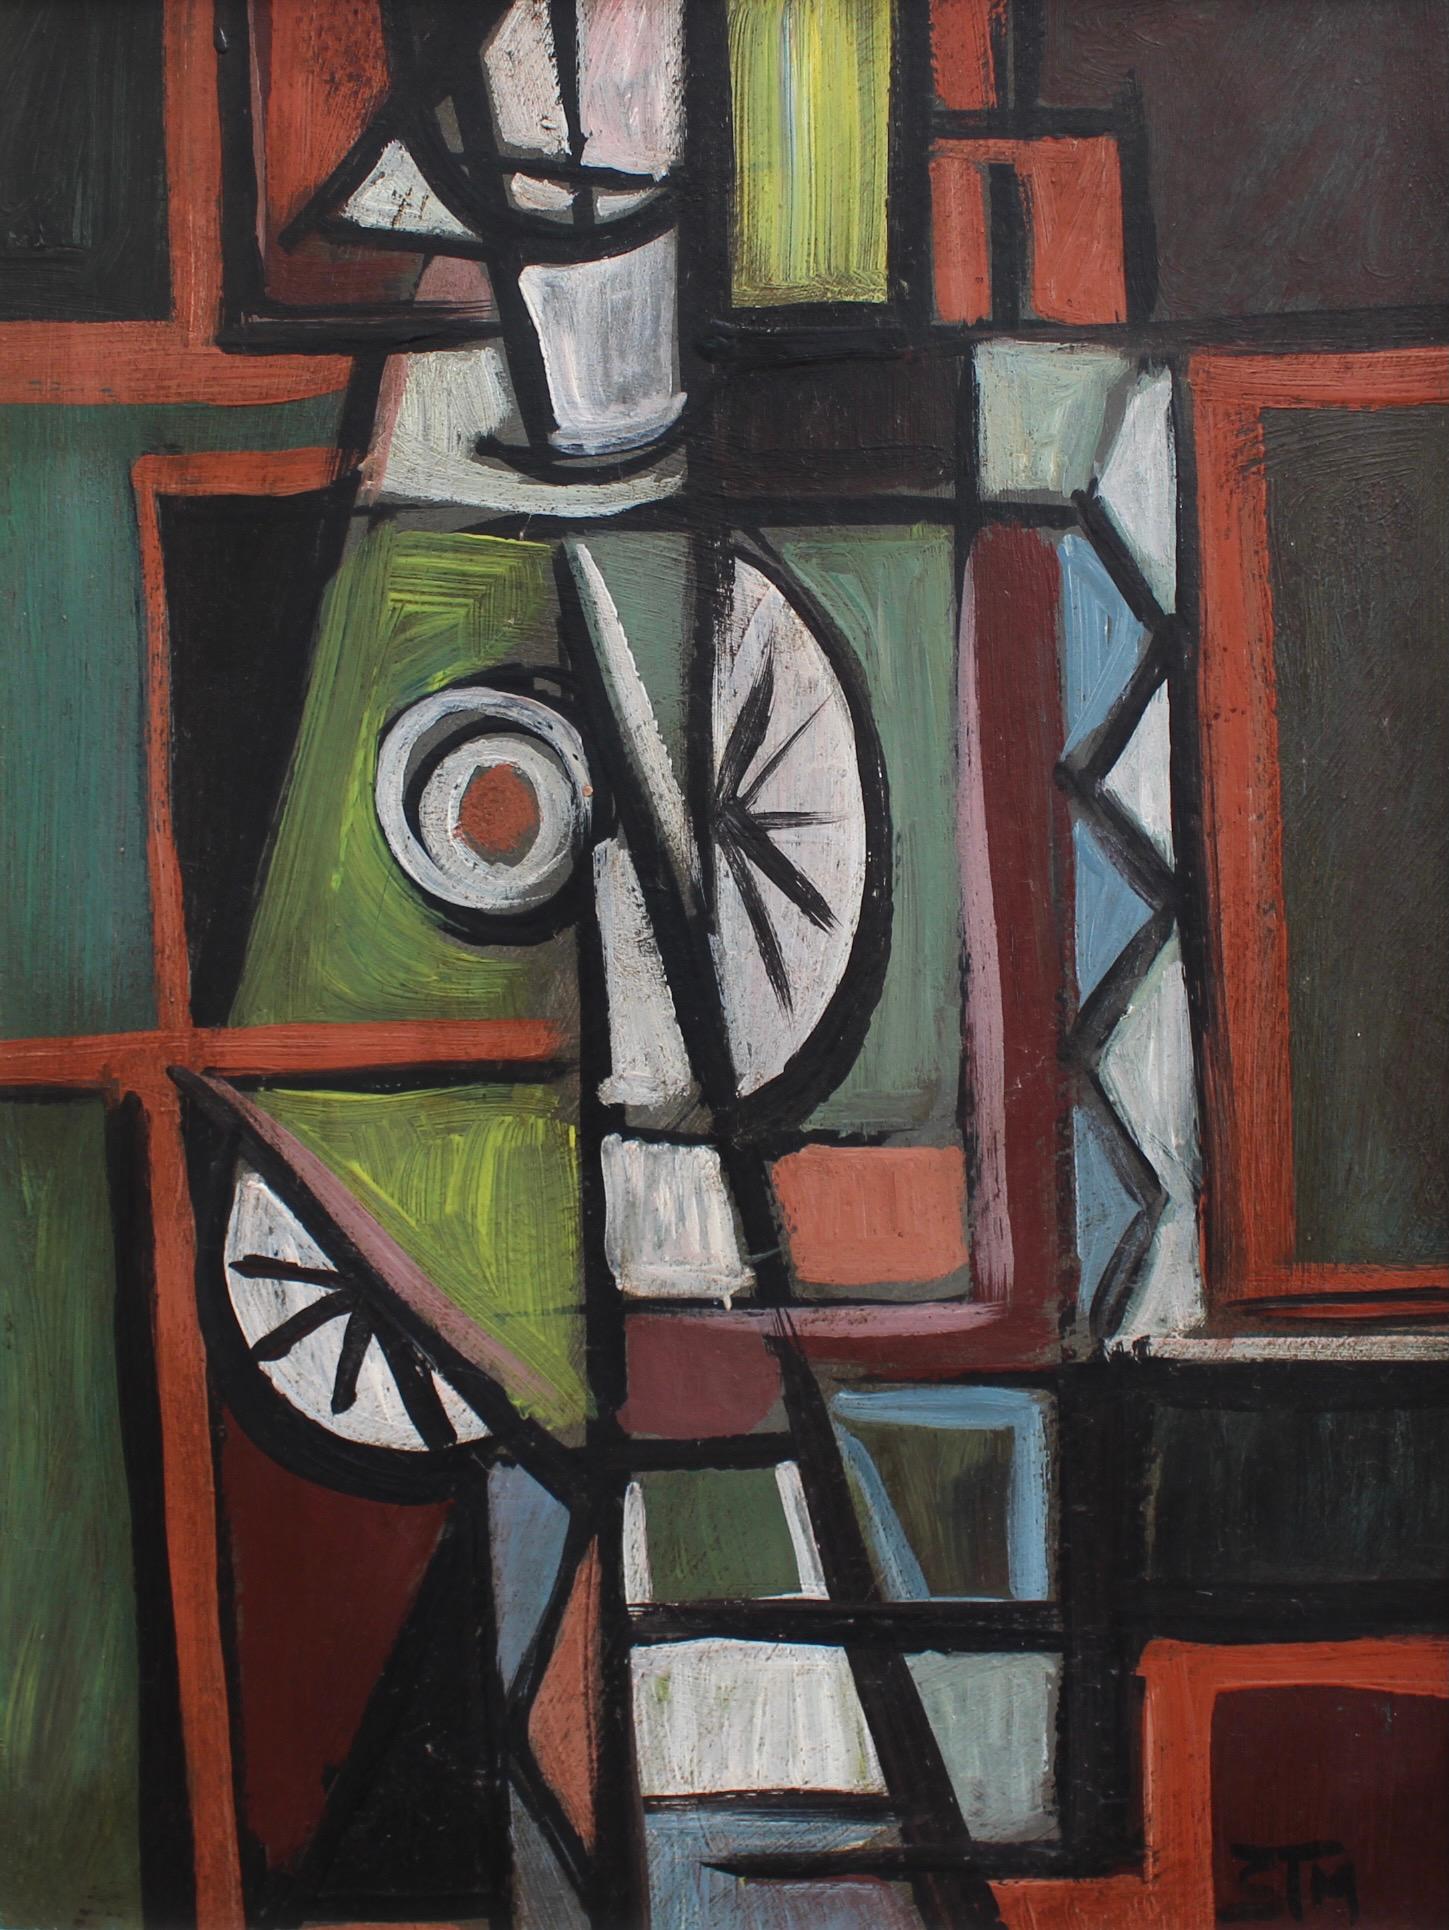 STM Abstract Painting - Cubist Composition in Colour